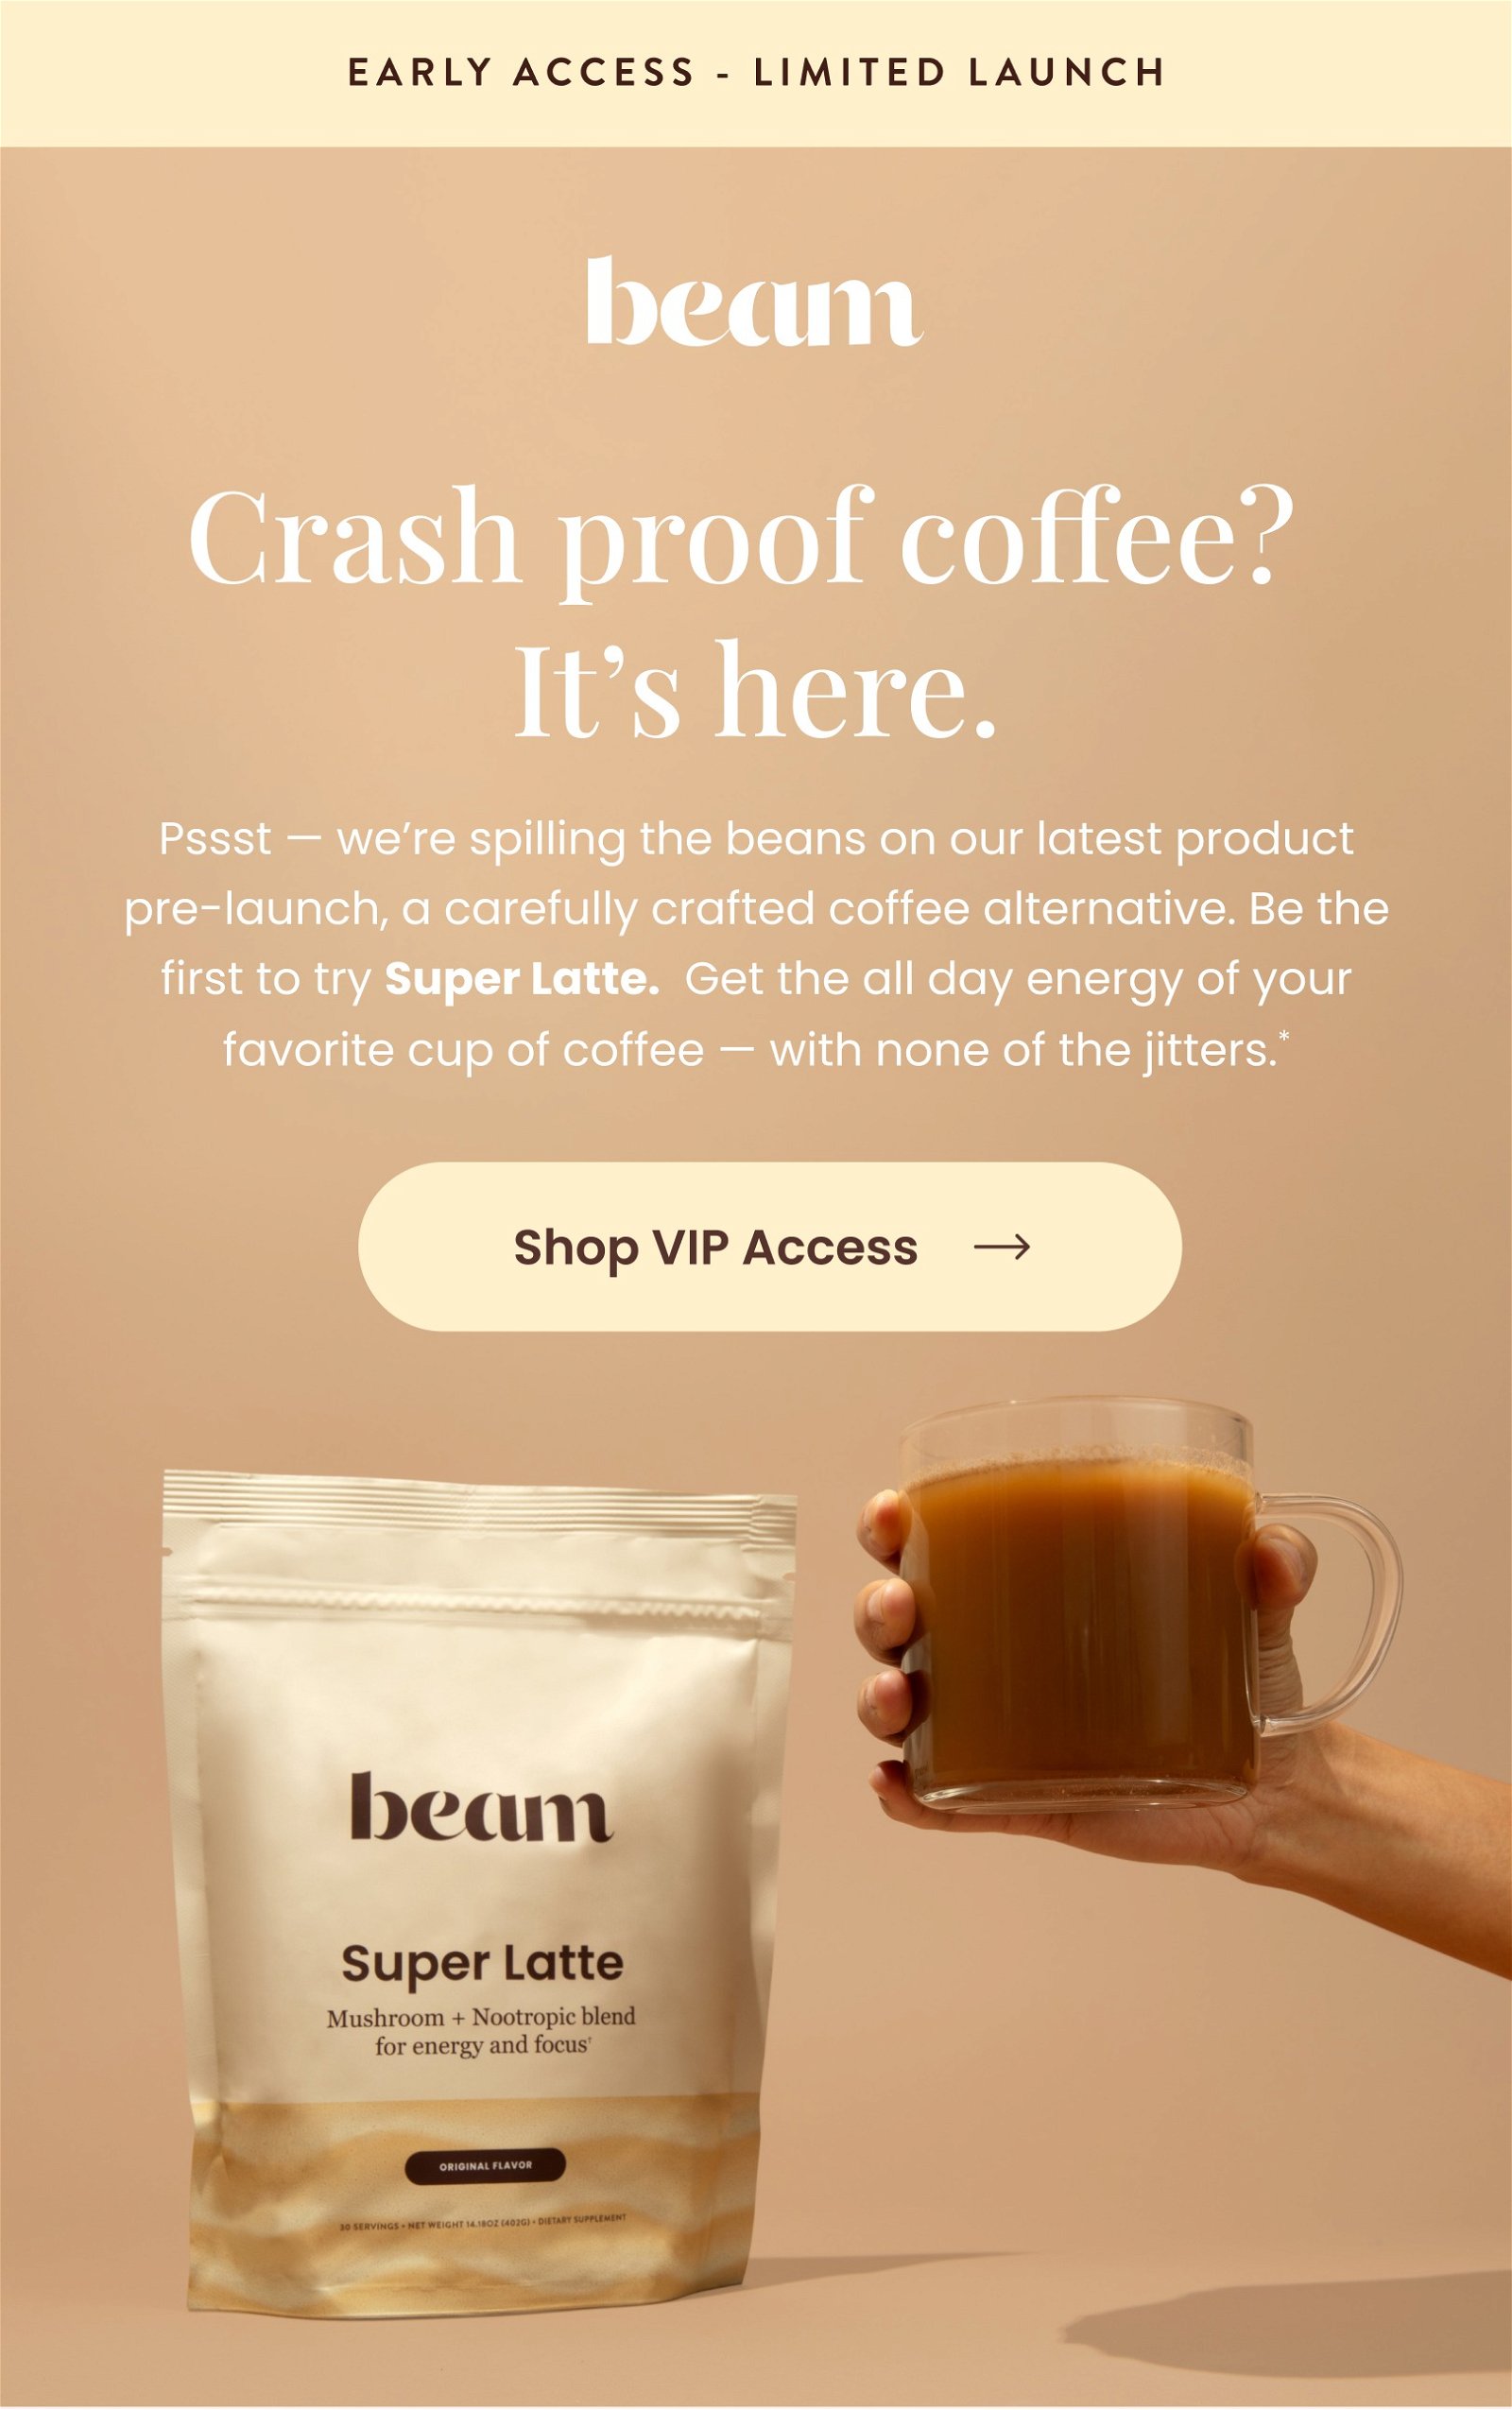 Pssst — we’re spilling the beans on our latest product pre-launch, a carefully crafted coffee alternative. Be the first to try Super Latte. Get the all day energy of your favorite cup of coffee — with none of the jitters.*